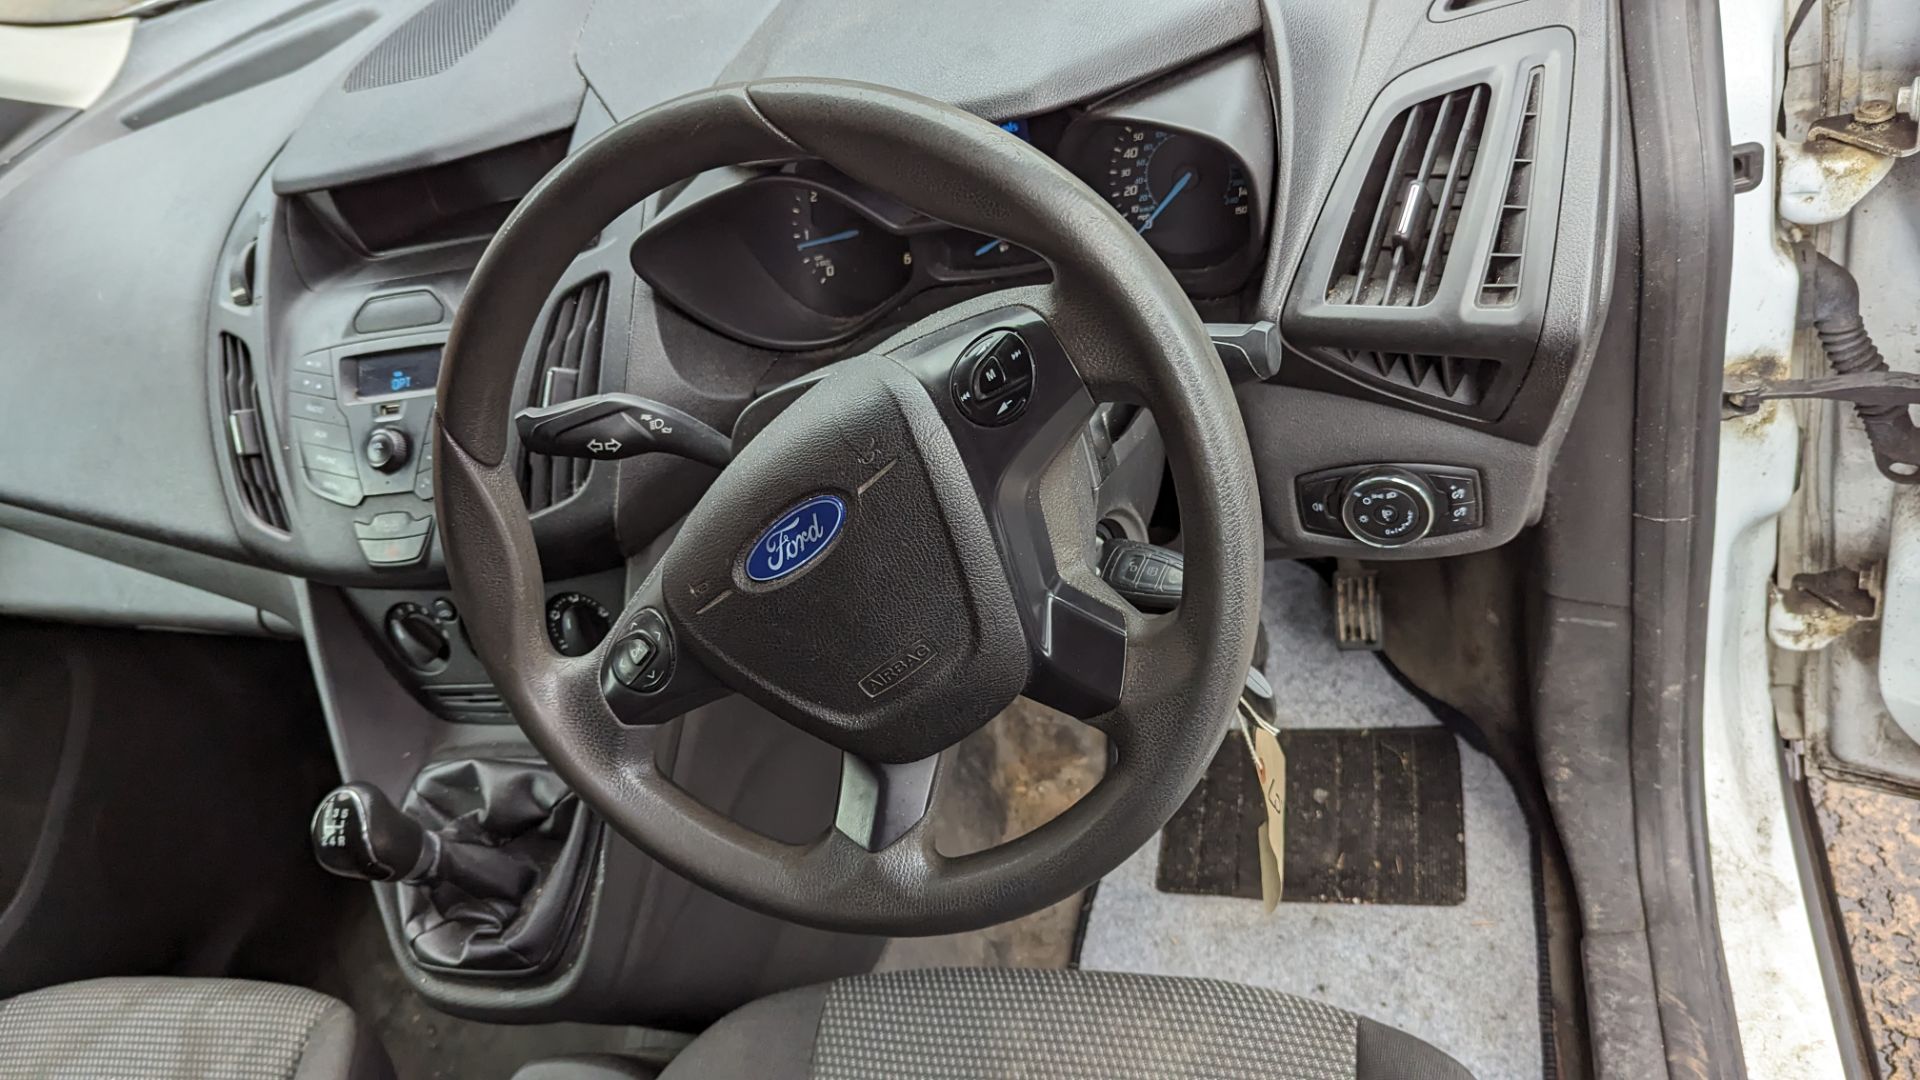 2014 Ford Transit Connect 200 panel van - Image 18 of 20